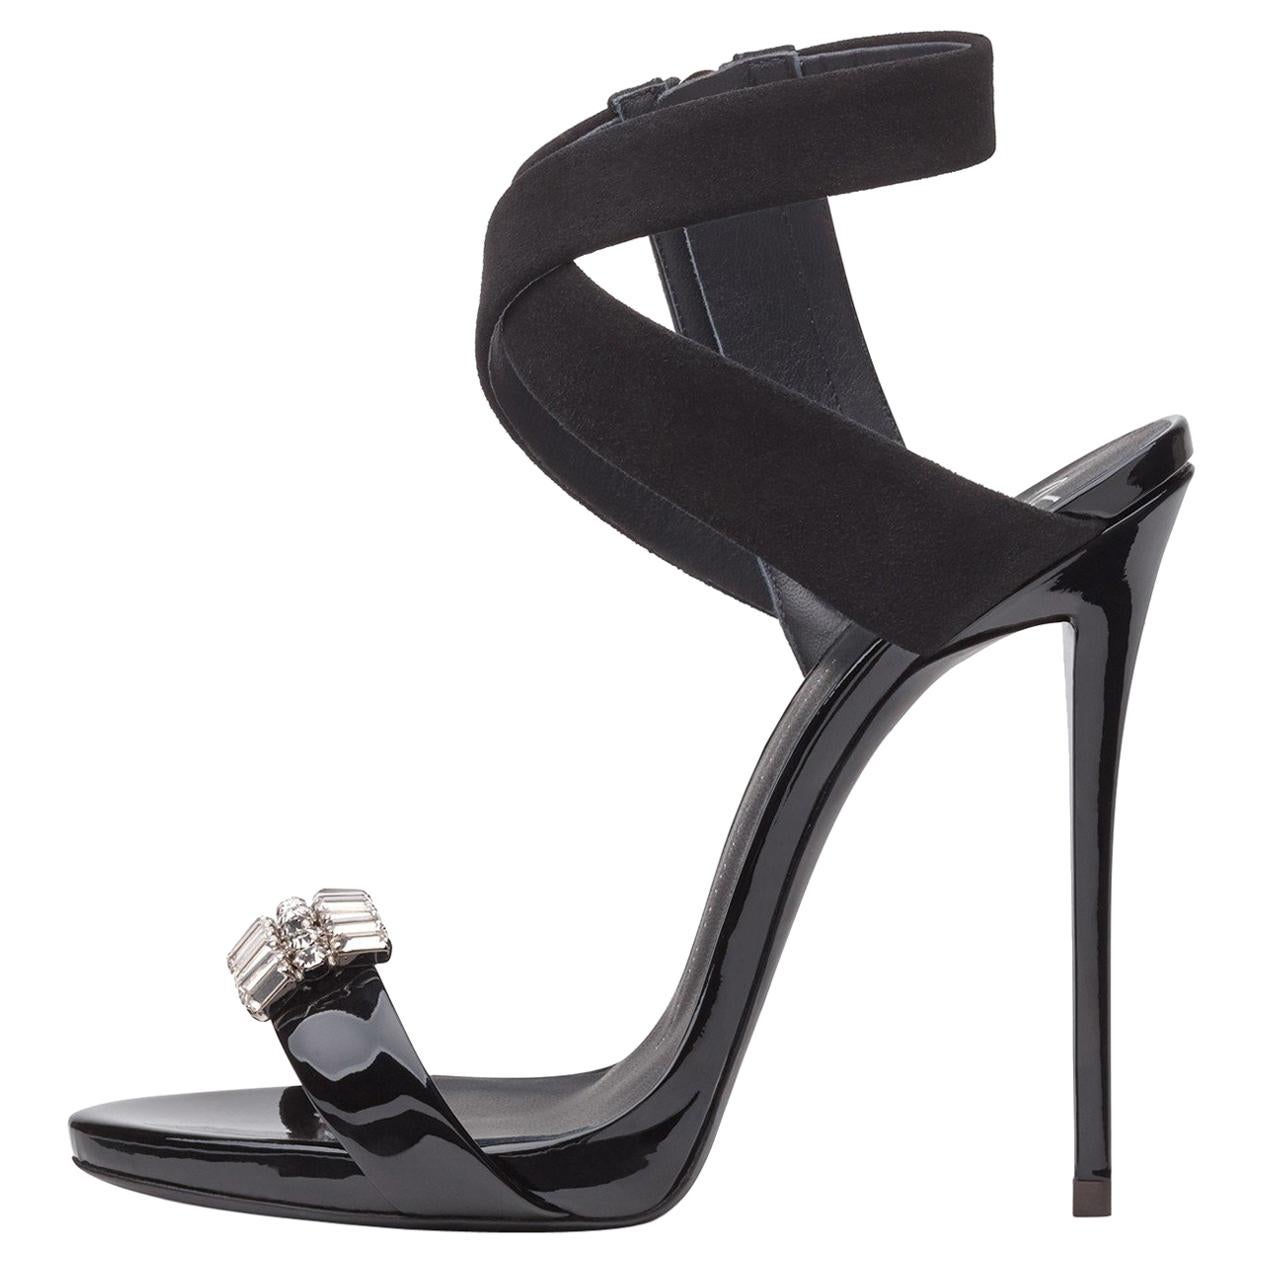 Giuseppe Zanotti NEW Black Suede Patent Crystal Evening Sandals Heels in Box